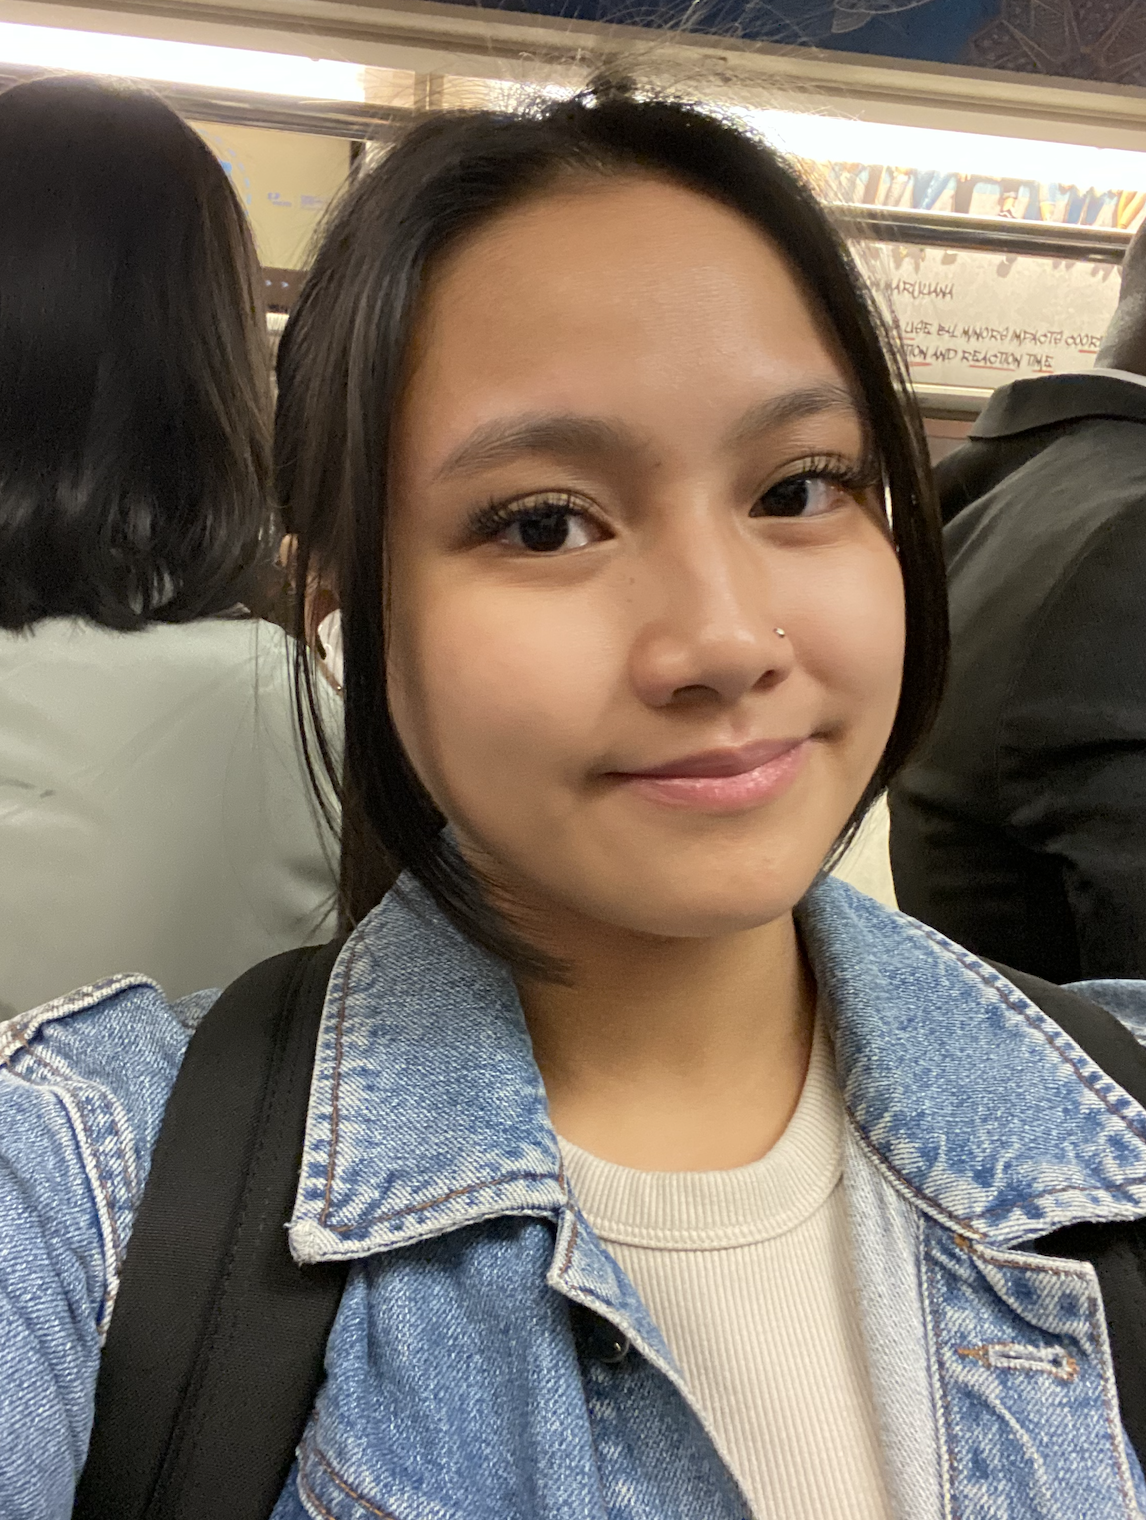 selfie of girl wearing makeup while on a crowded train